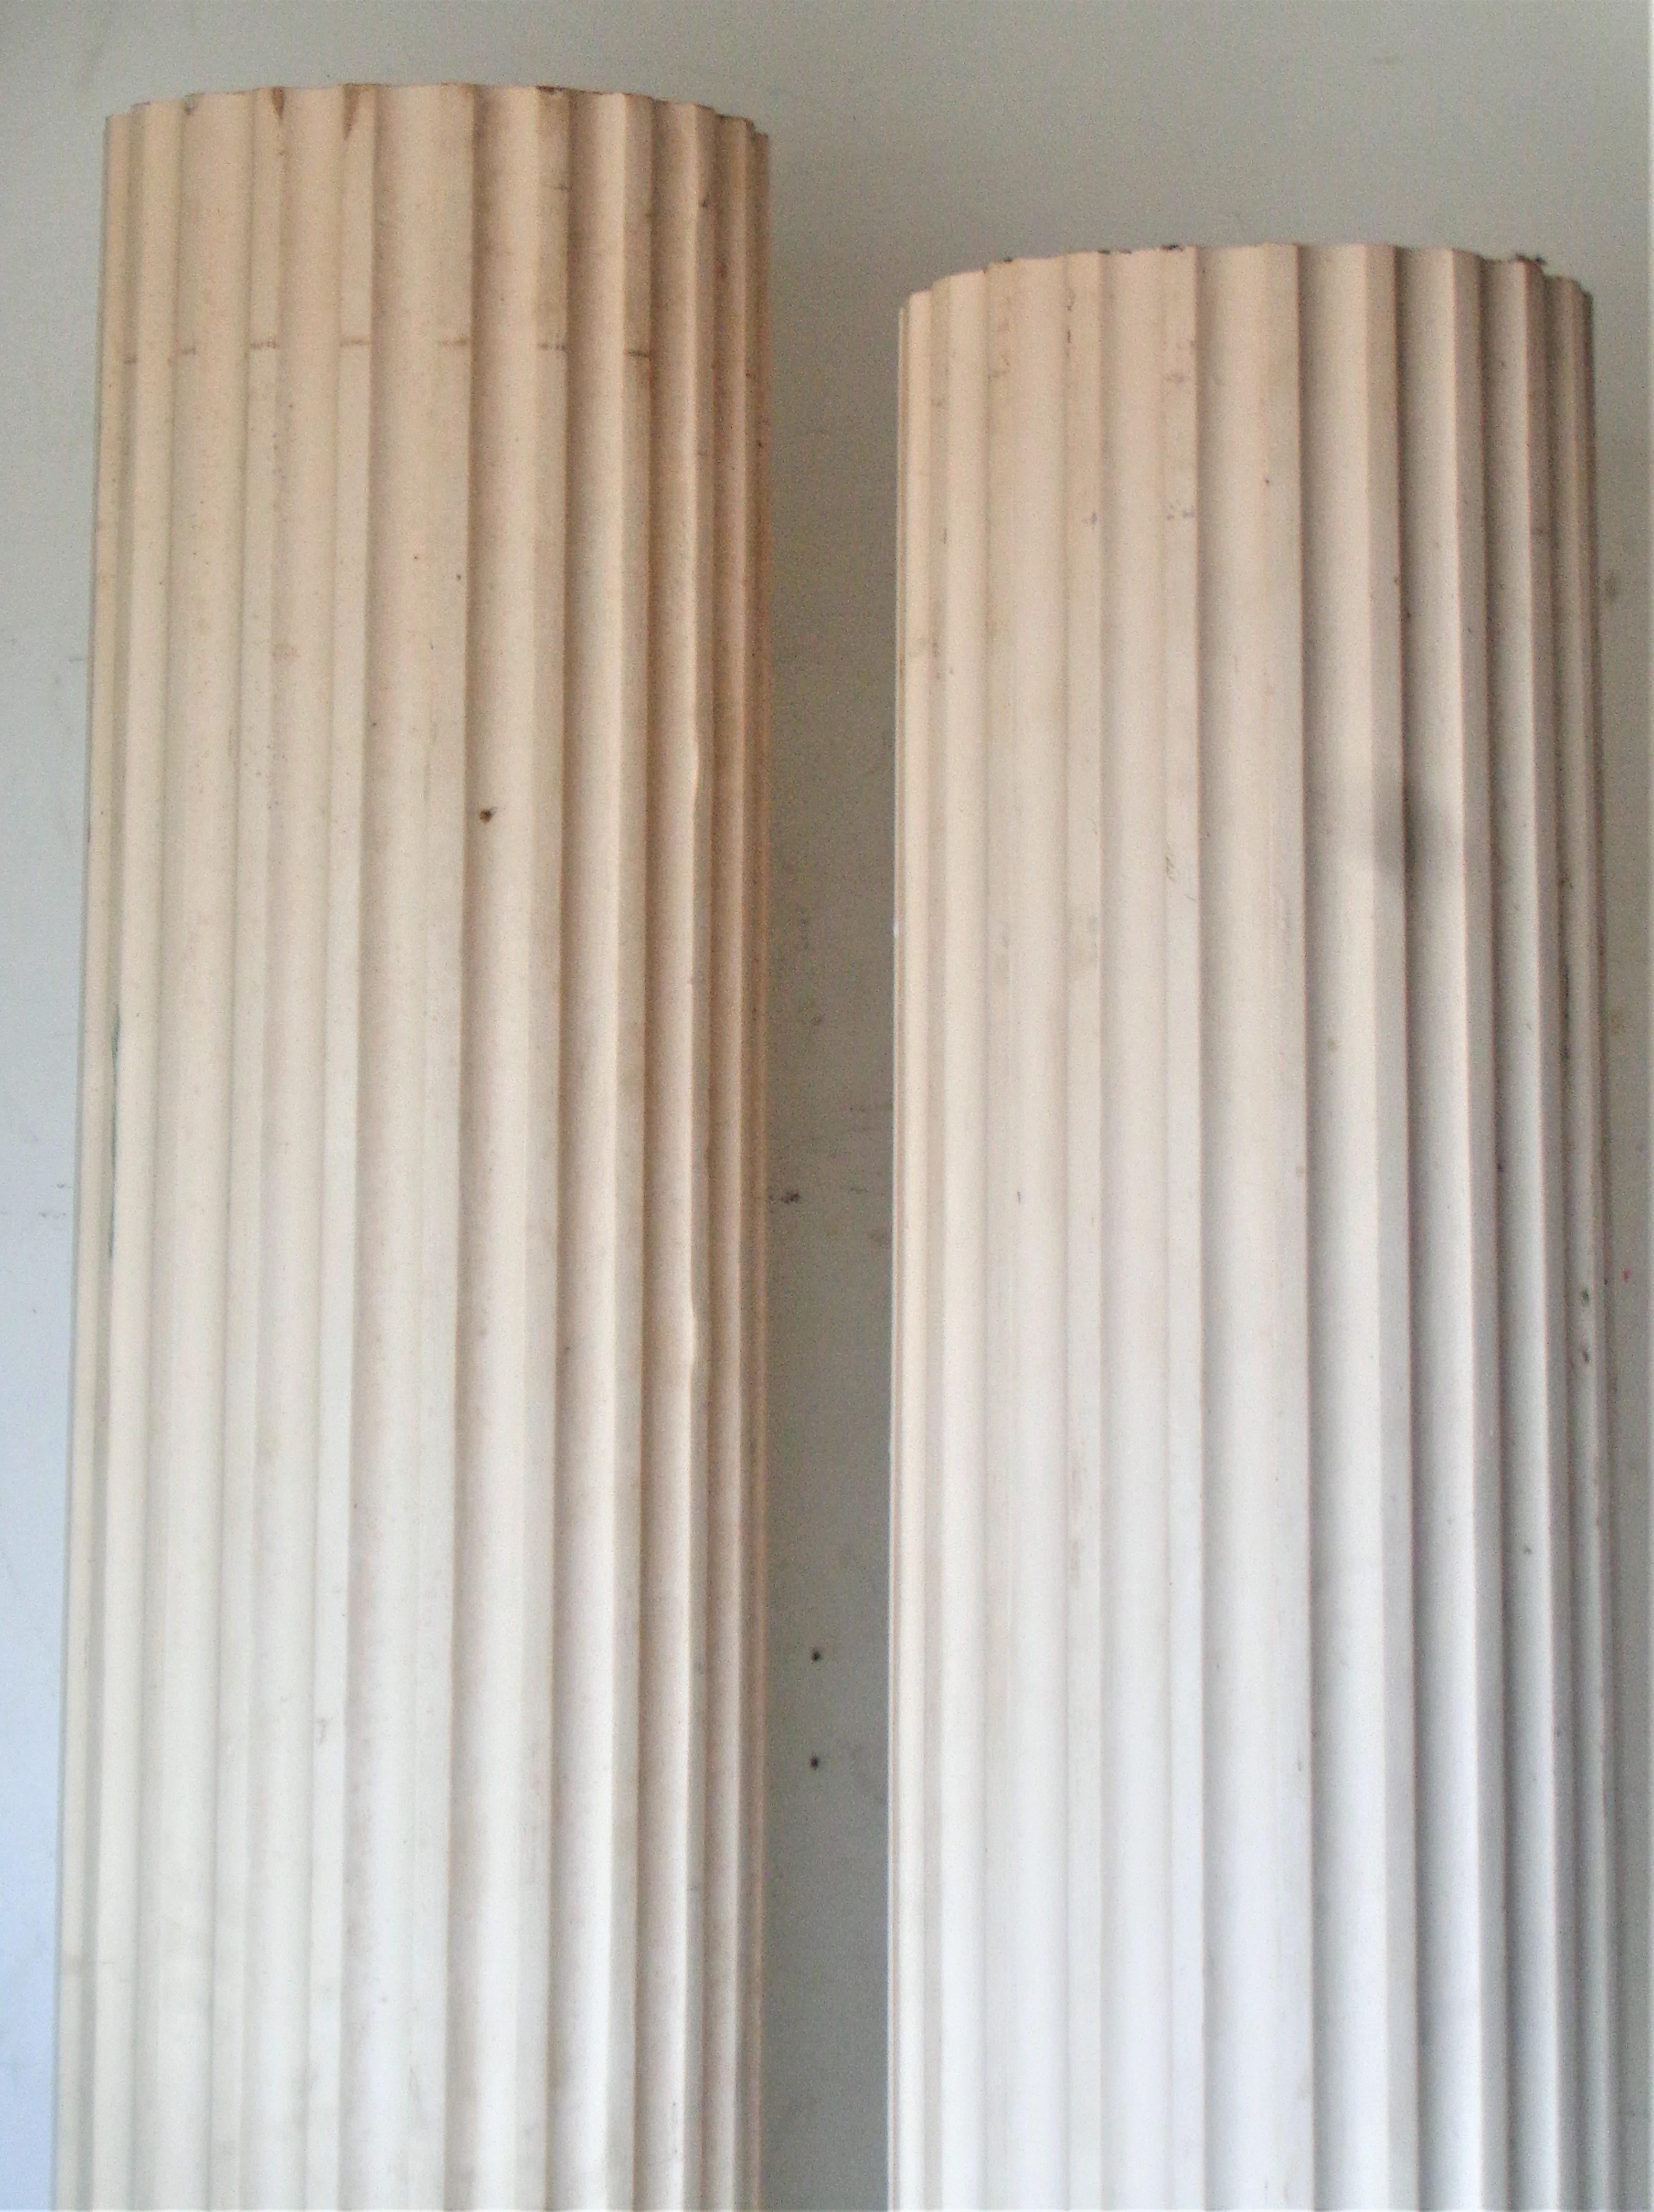 Antique American Architectural Fluted Wood Columns For Sale 1